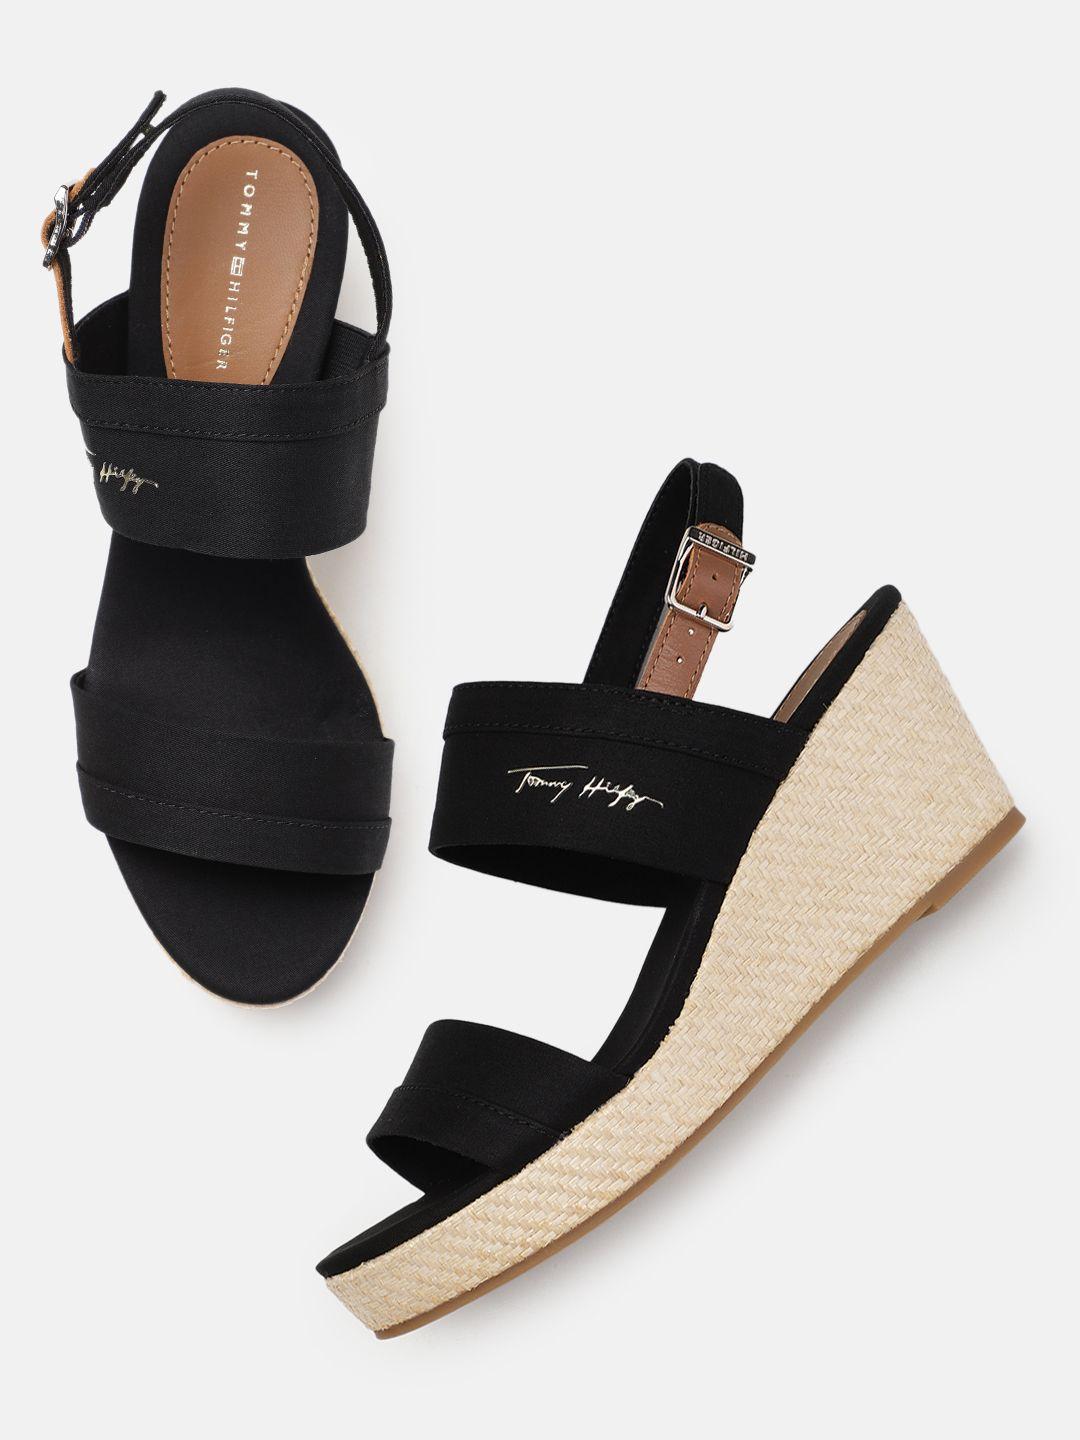 tommy hilfiger wedges with back strap